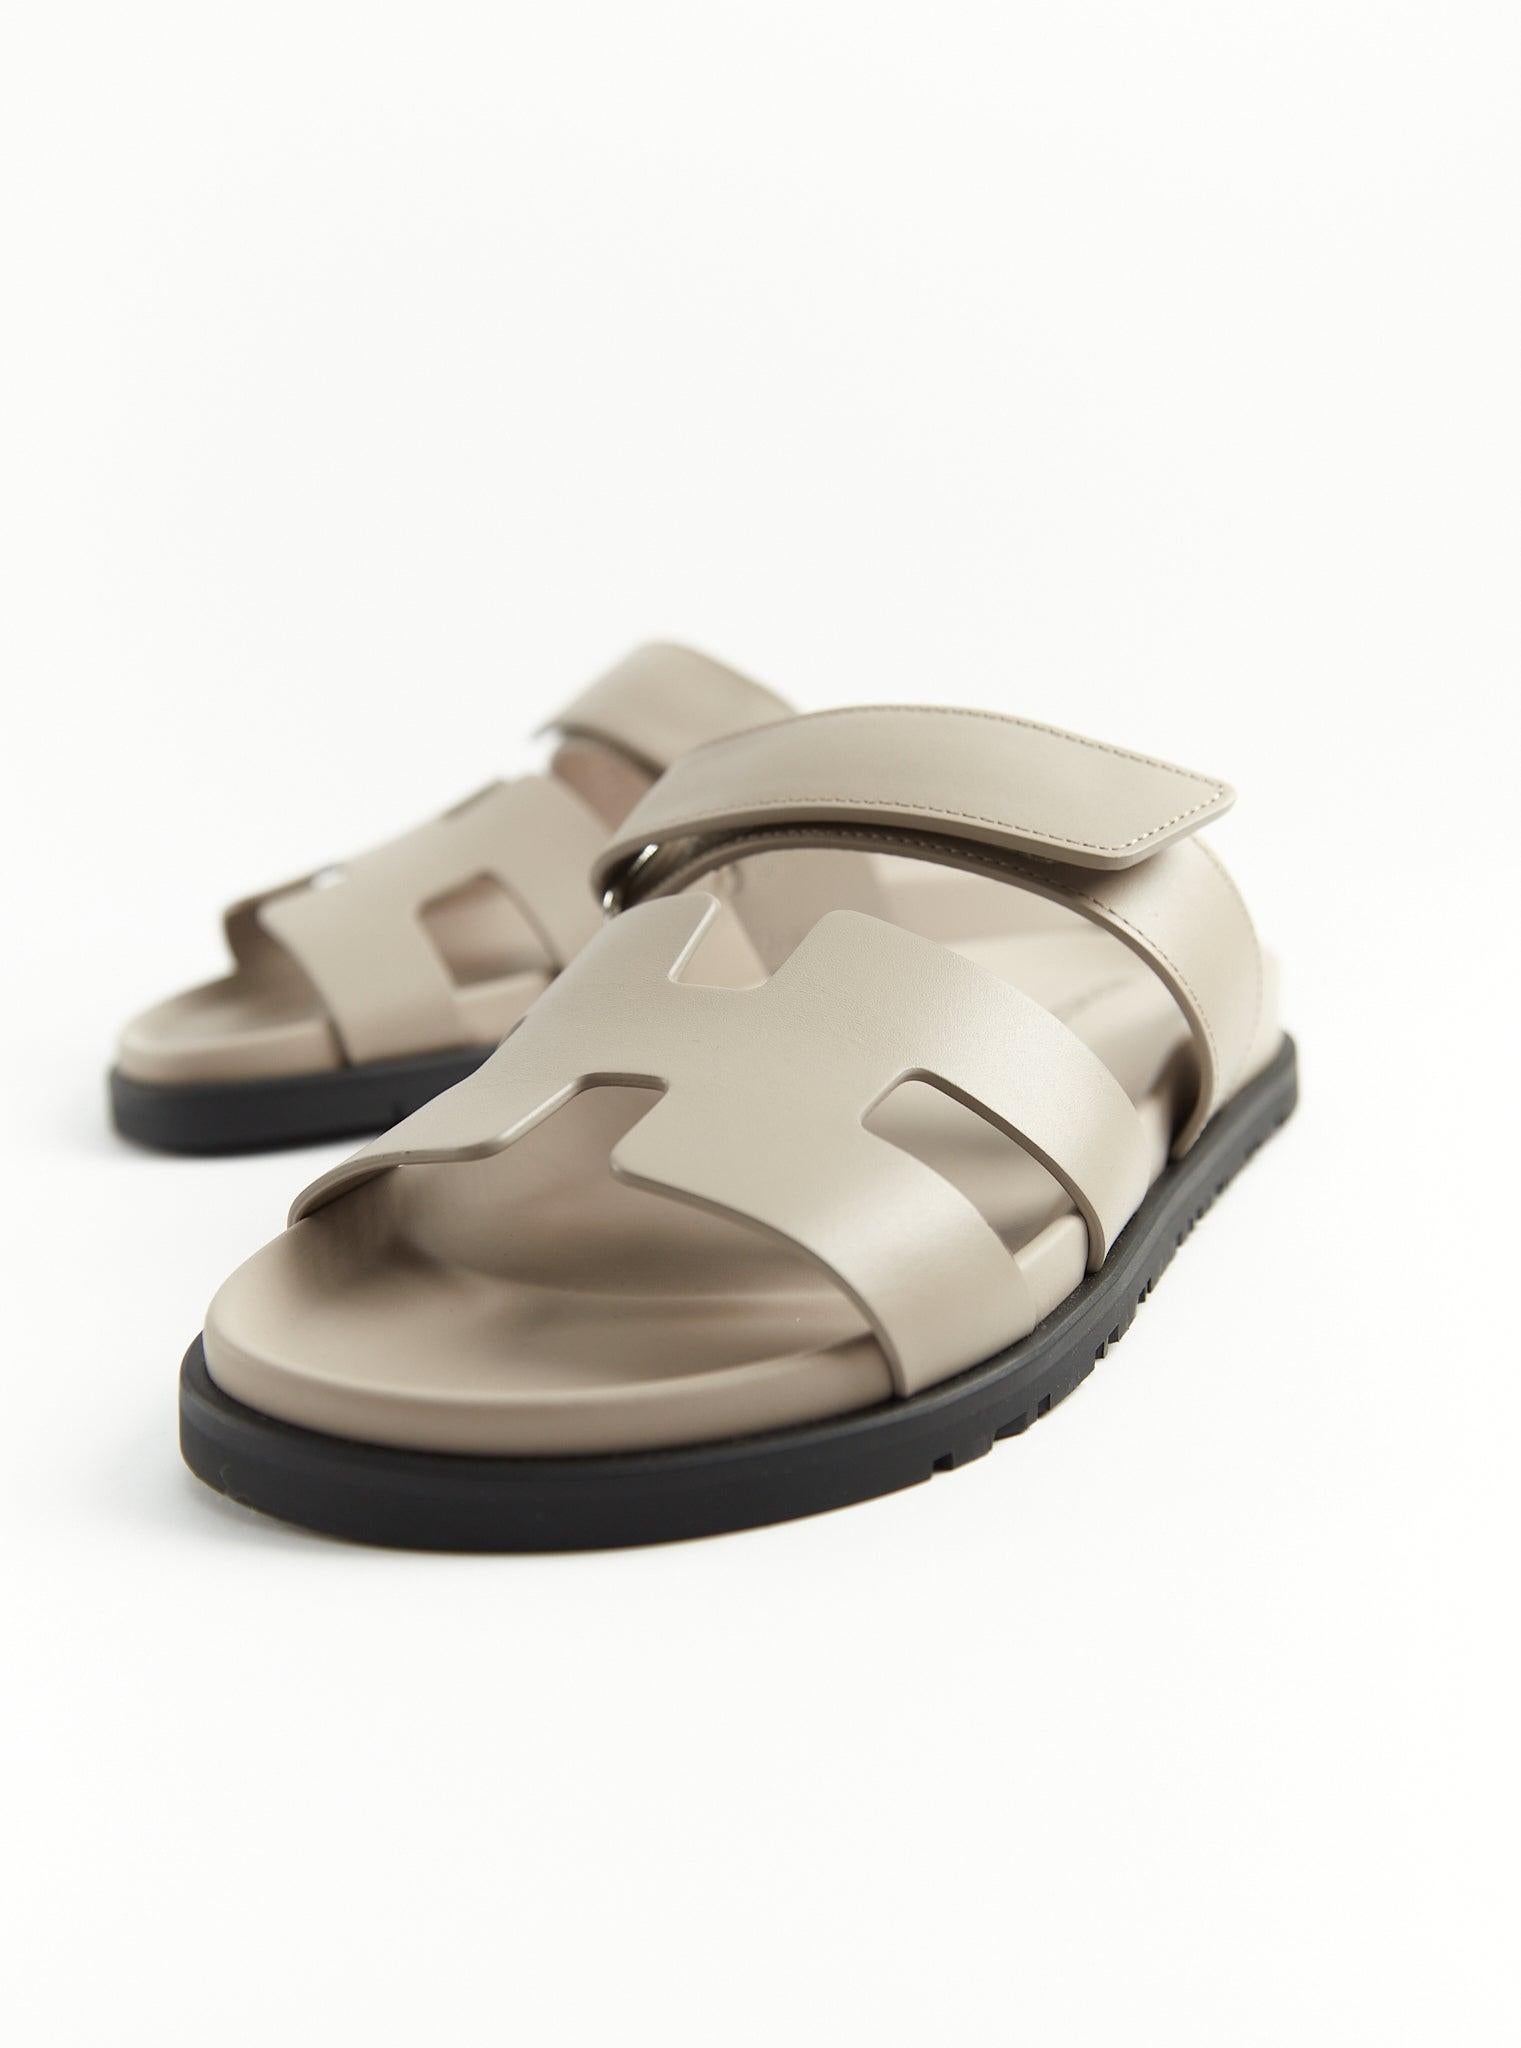 Hermès Techno-sandal in calfskin with rubber sole and adjustable strap

Beige calfskin insole and goatskin lining 

Accompanied by: Hermès box, dust bags and ribbon

Size 36

*Box corner damaged